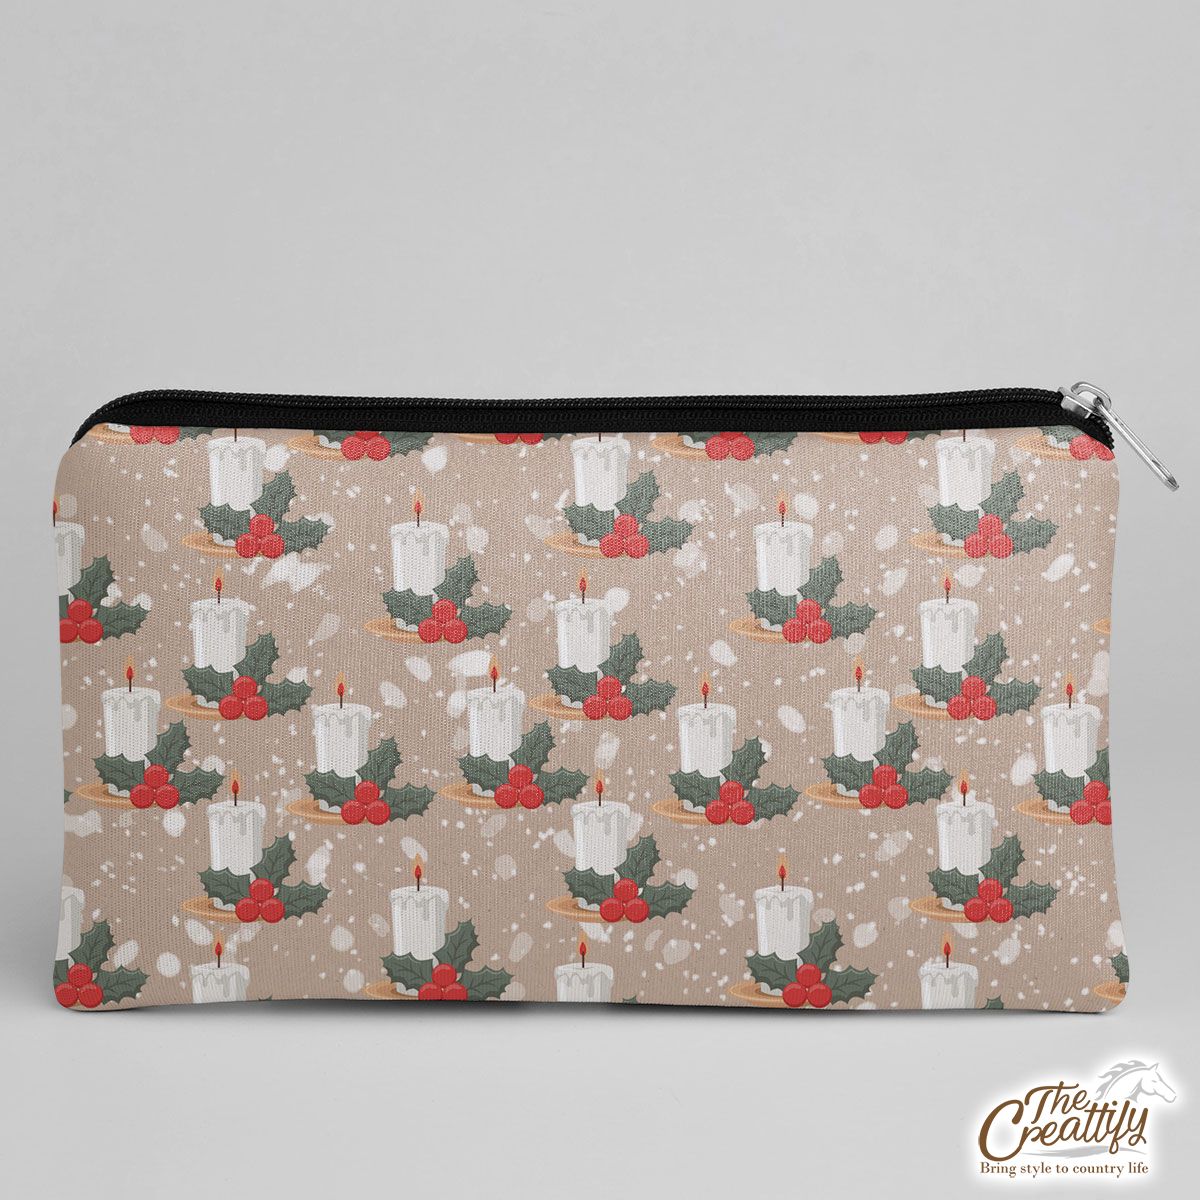 Christmas Candle With Holly Leaf On Snowflake Background Makeup Bag